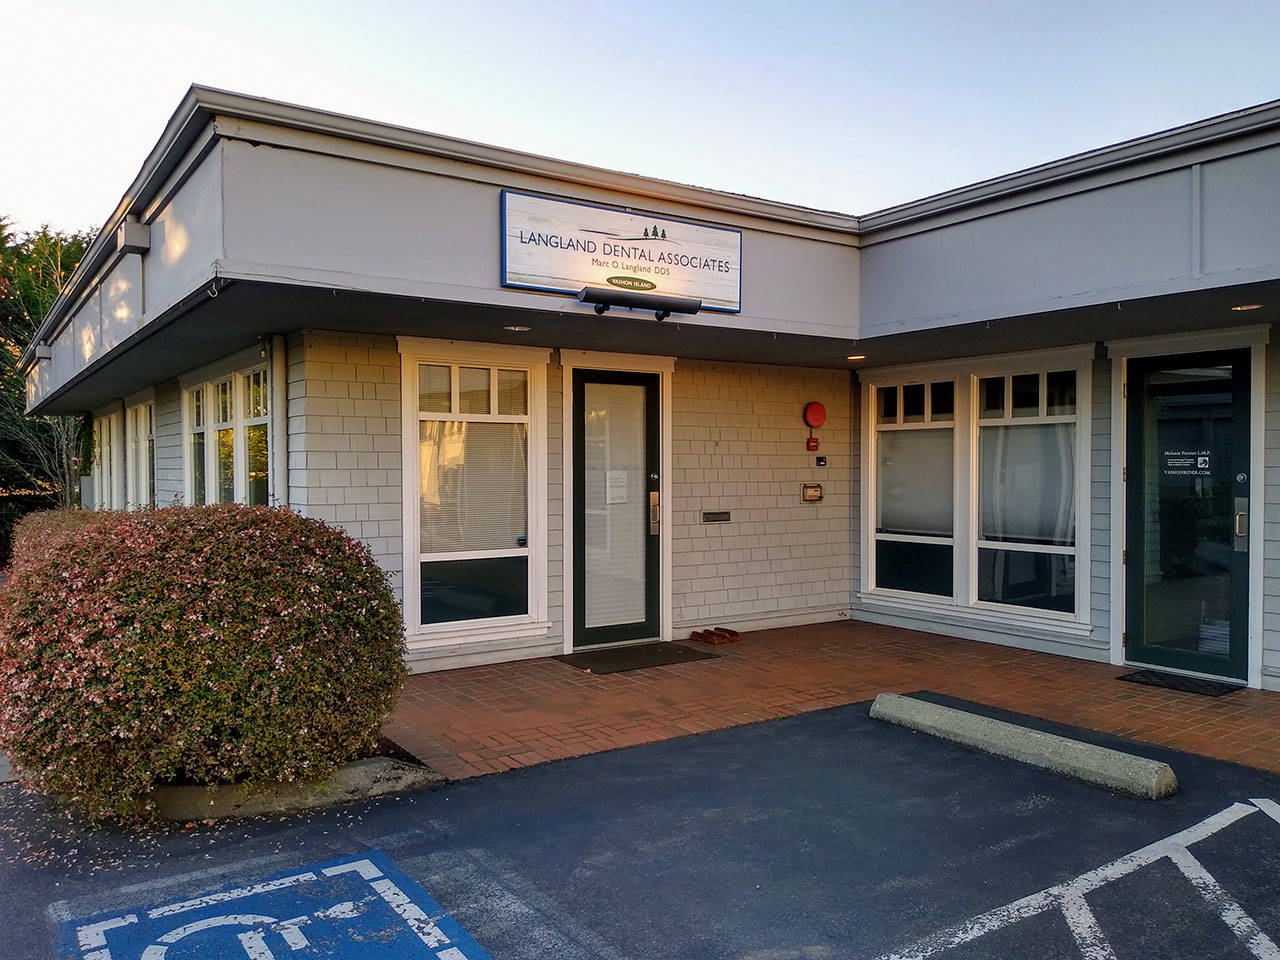 Landland Dental Associates on Monday evening. A sign in the door said the office will be closed the week of Oct. 5 and reopen Oct. 12 (Paul Rowley/Staff Photo).